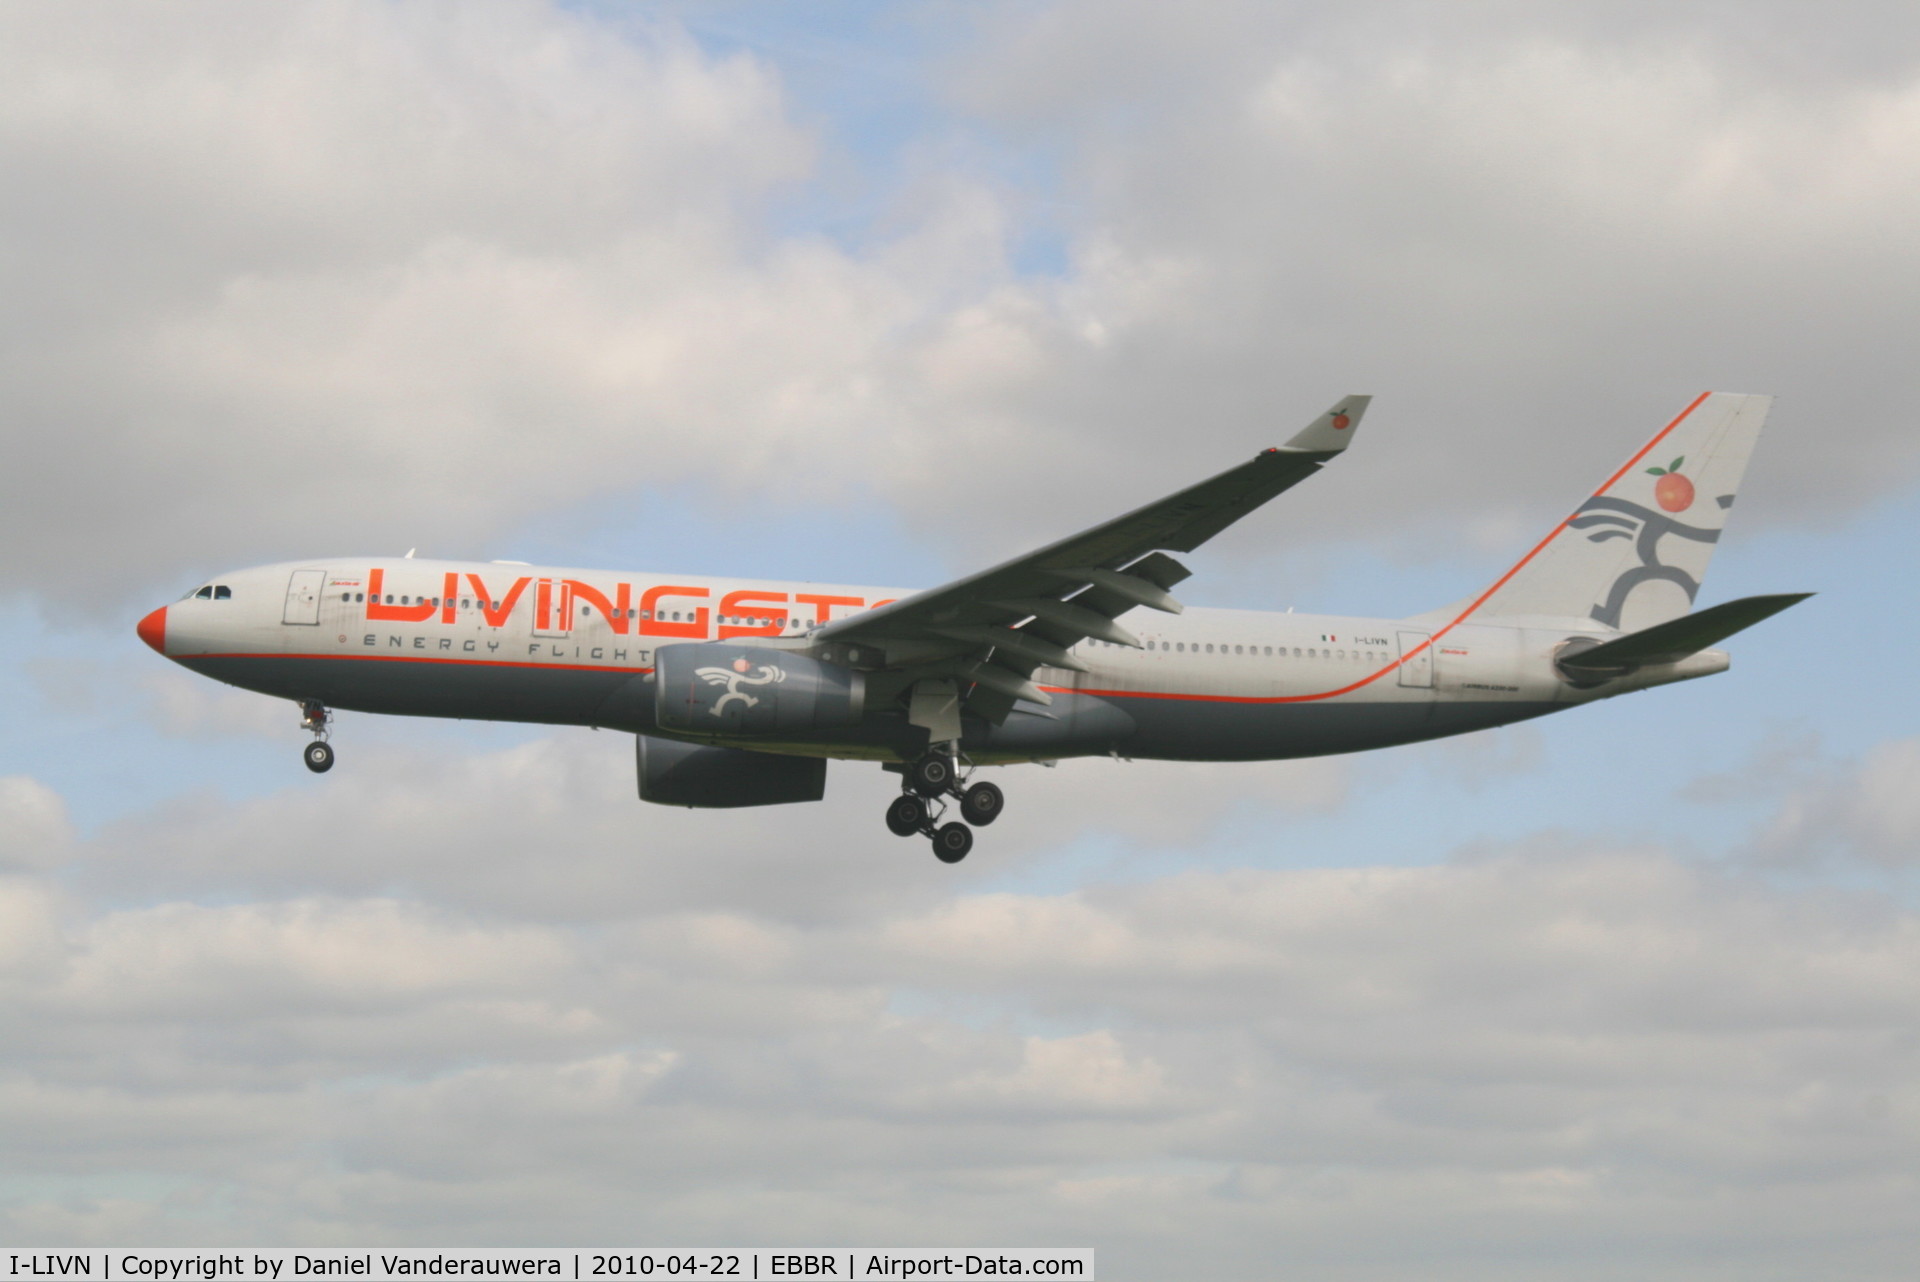 I-LIVN, 2004 Airbus A330-243 C/N 597, Arrival to RWY 25L